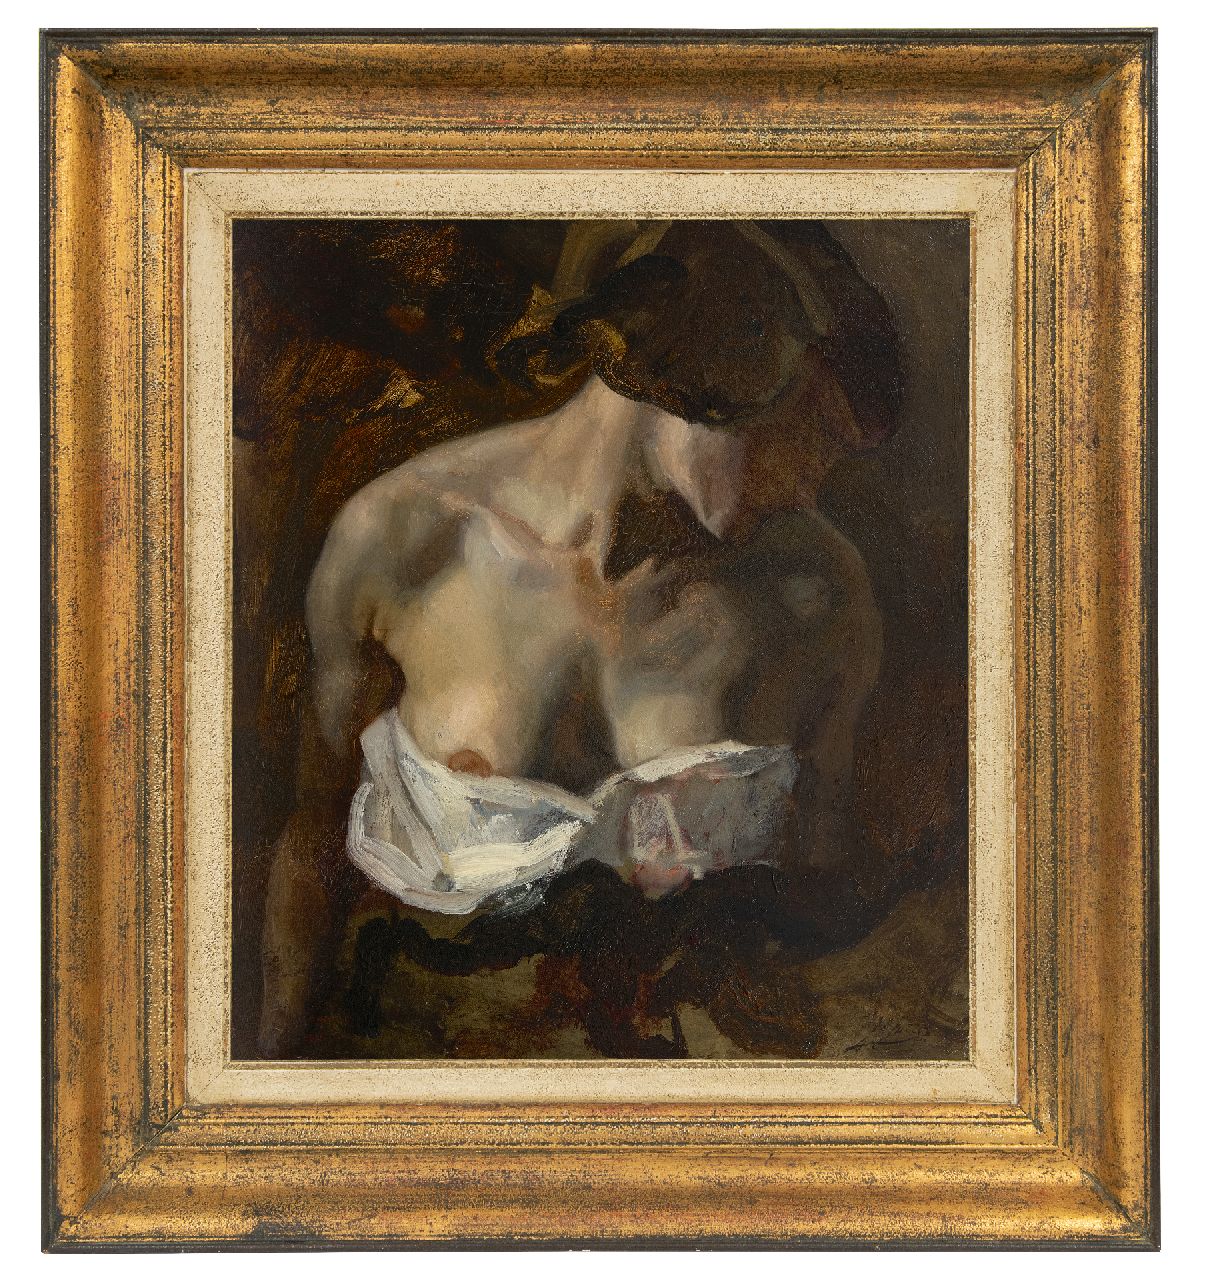 Jurres J.H.  | Johannes Hendricus Jurres | Paintings offered for sale | Bare-chested Delilah (study for Samson and Delilah), oil on canvas 52.3 x 45.5 cm, signed l.r.